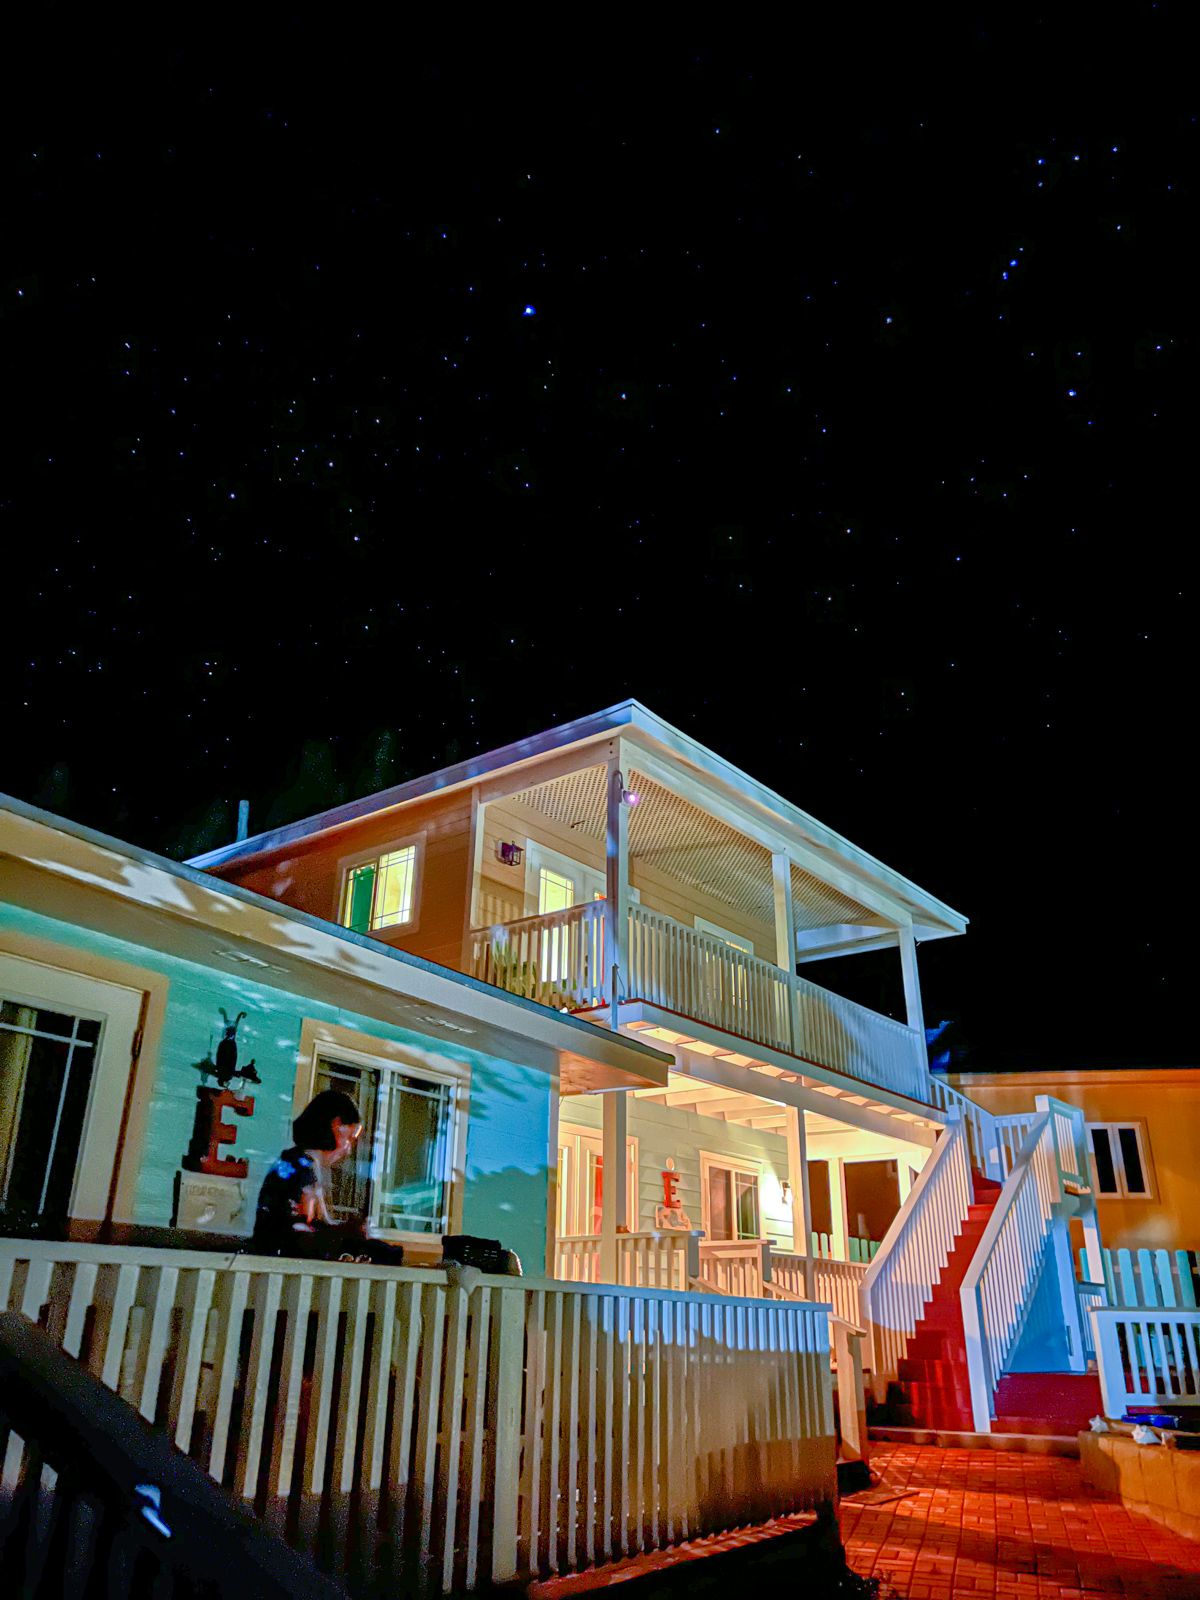 Night's sky at EMBRACE Resort on Staniel Cay in The Bahamas